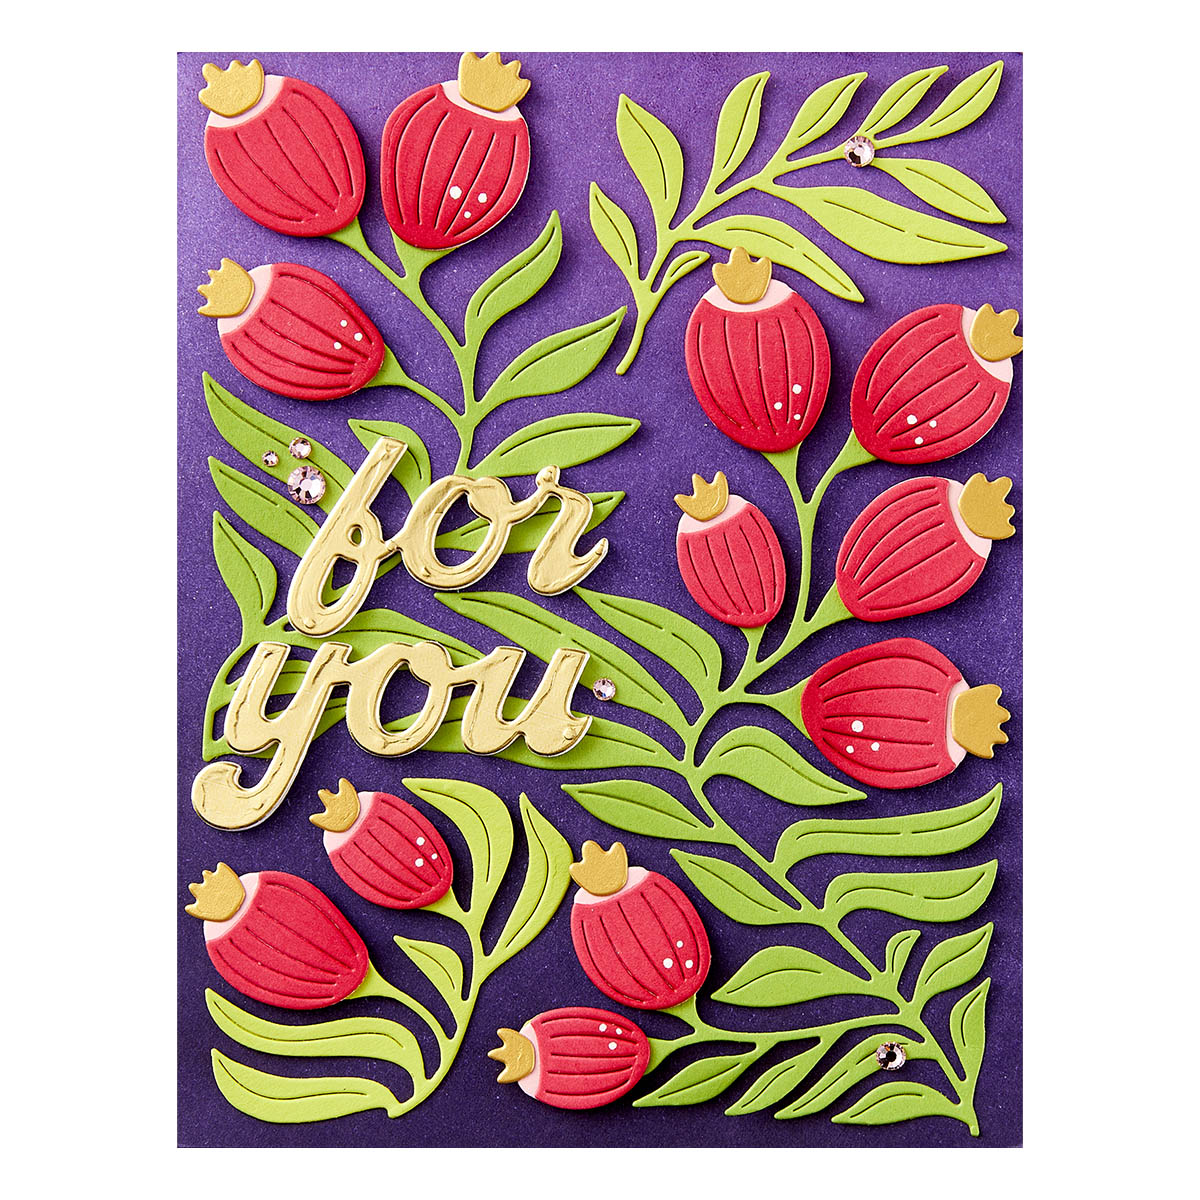 Spellbinders Fresh Picked Berries Etched Dies From the Fresh Picked Collection